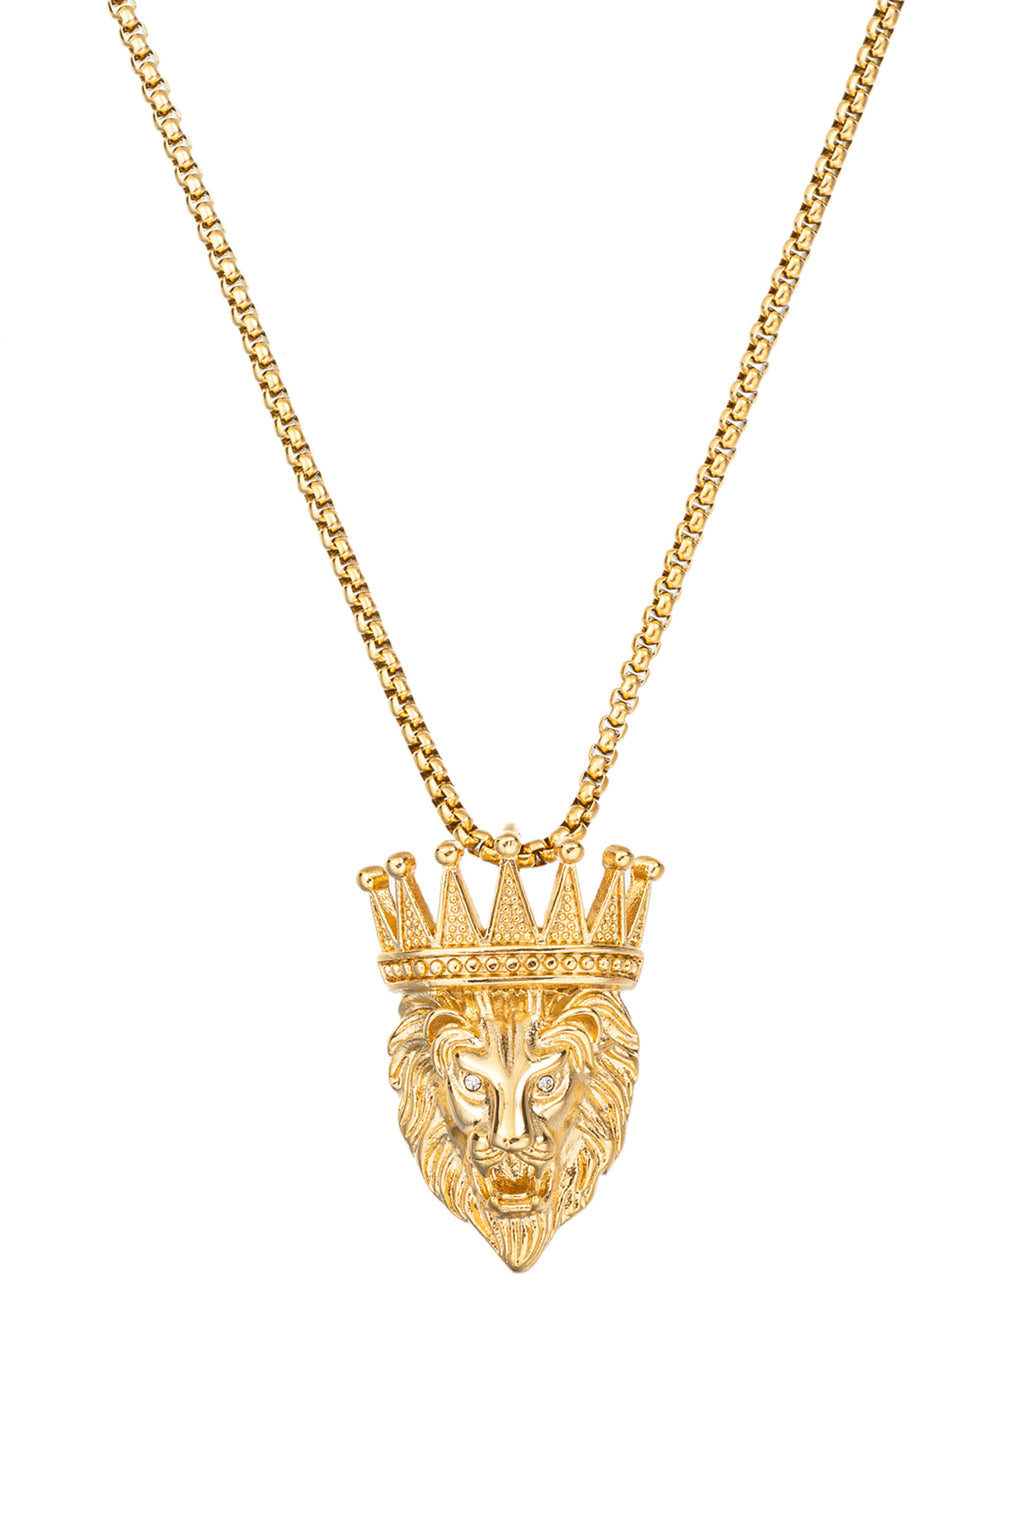 Gold tone titanium lion head king pendant necklace with CZ crystal eyes.